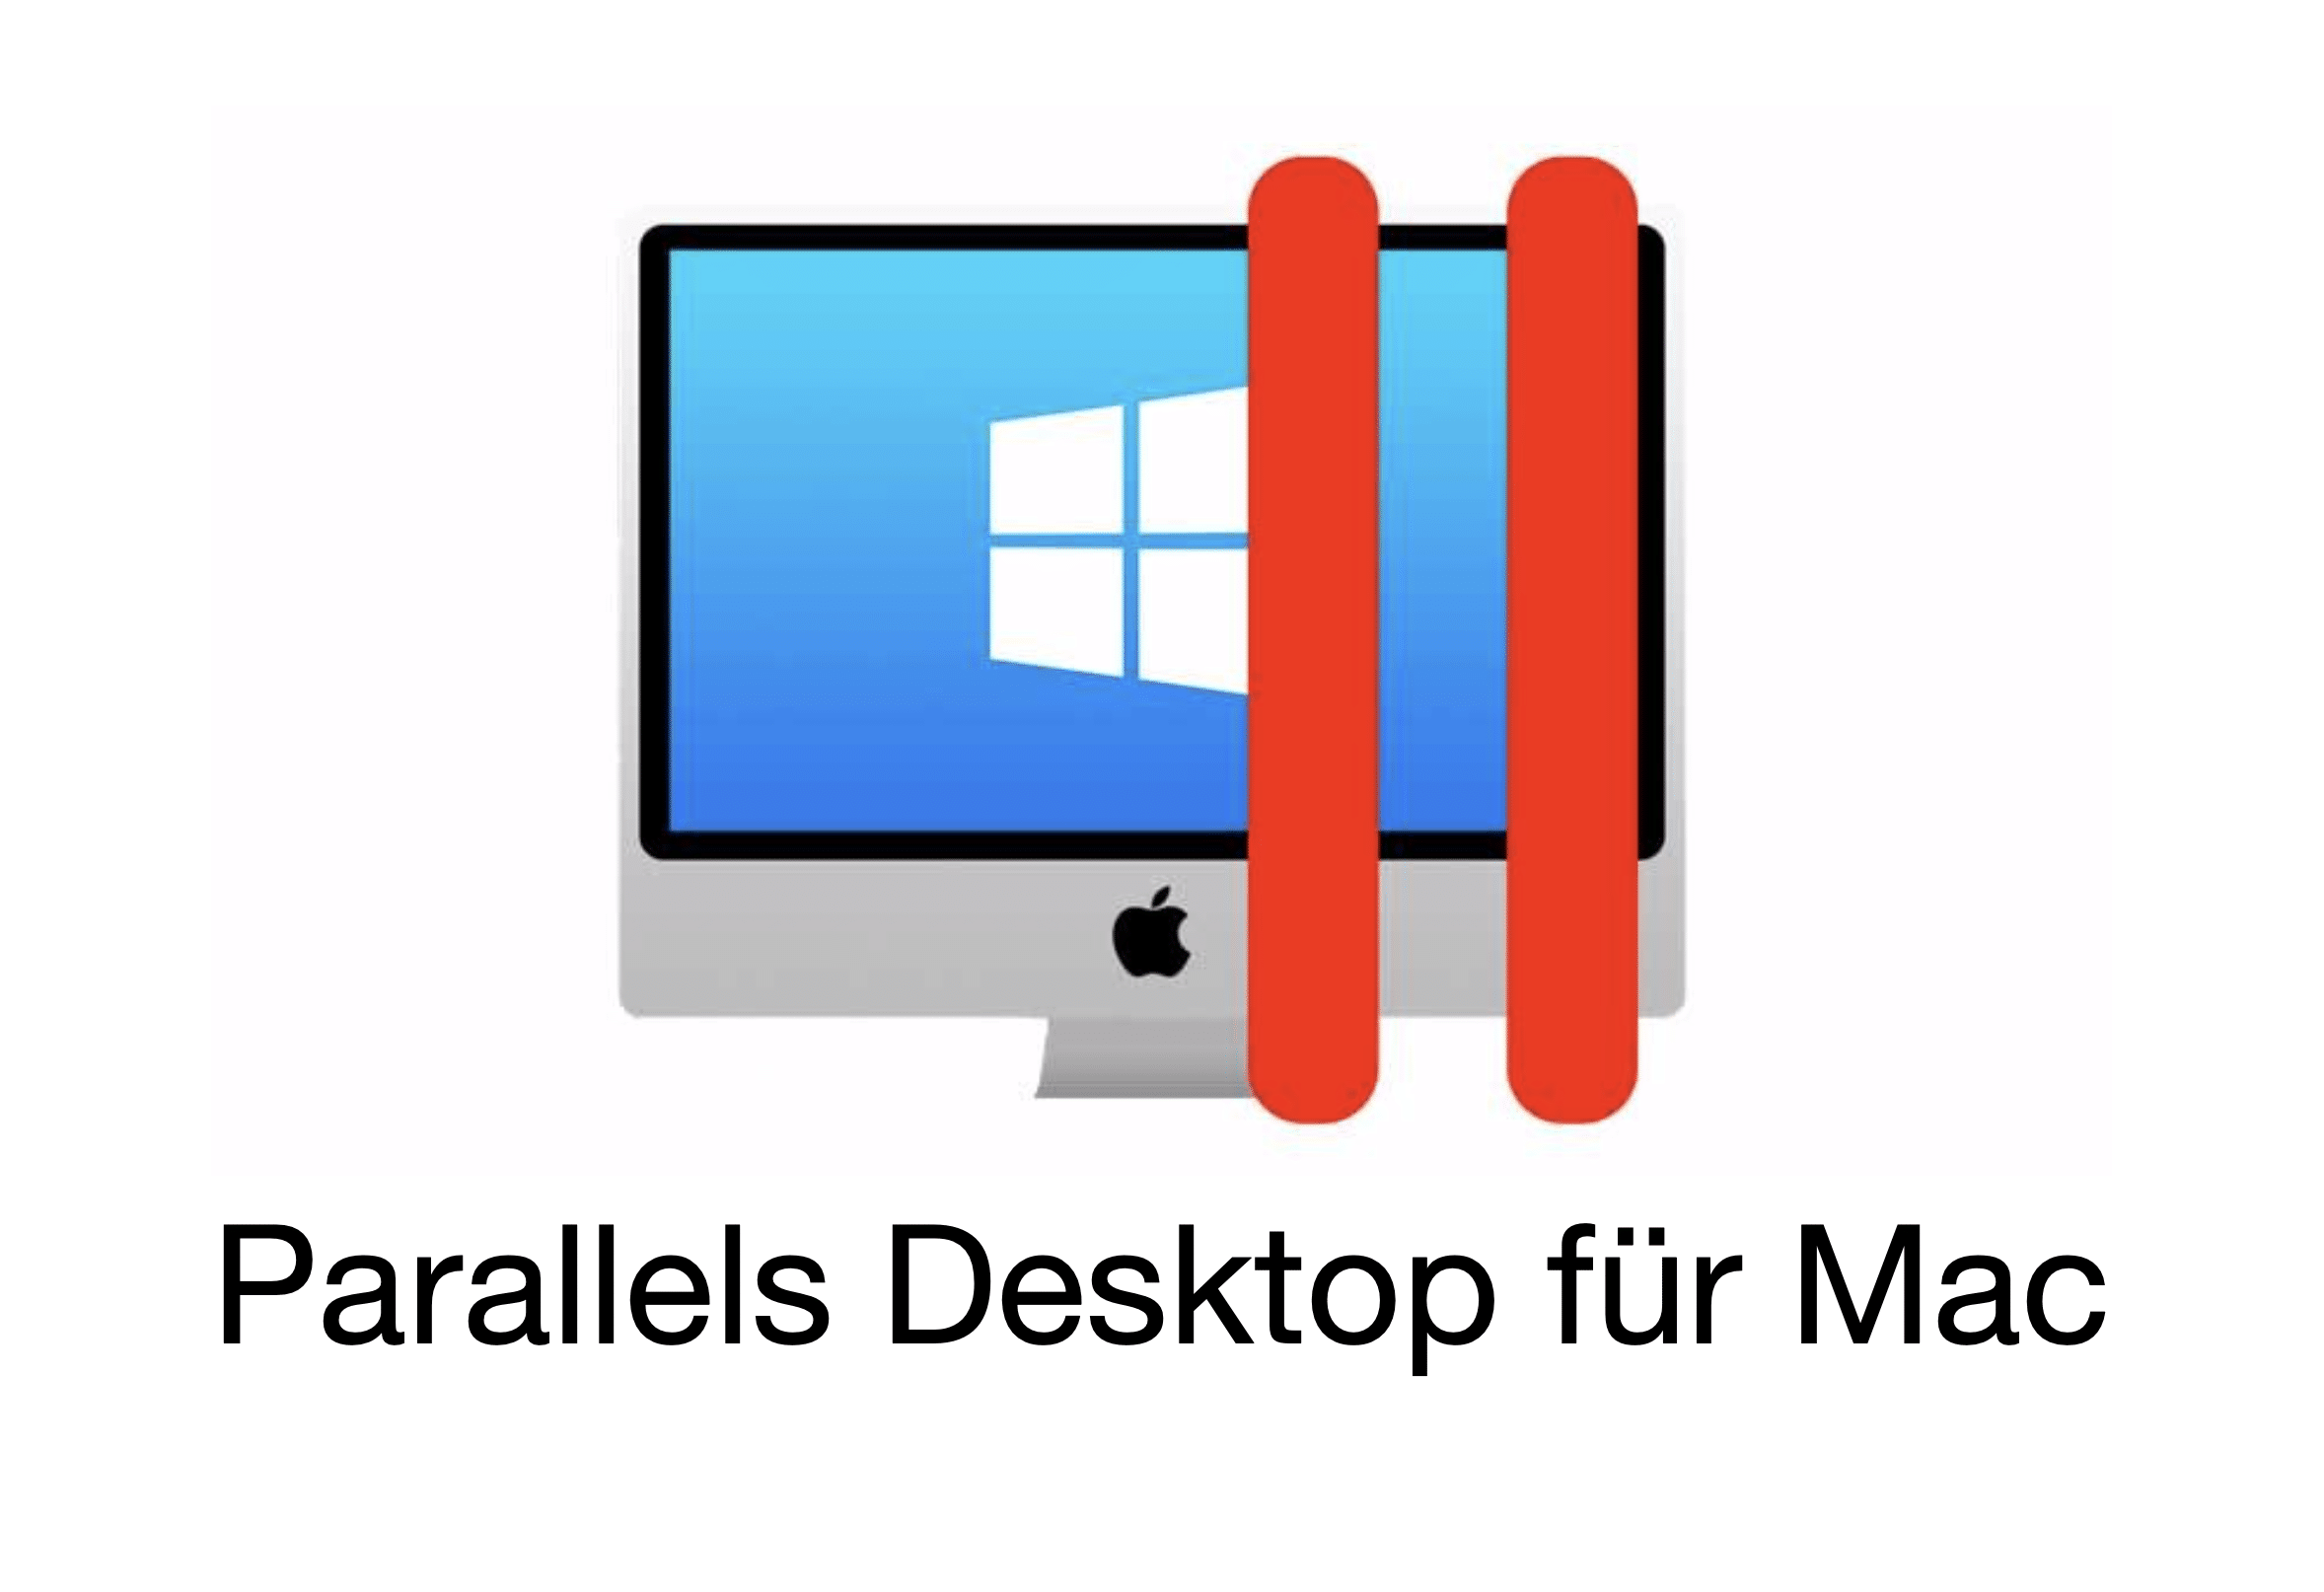 latest version of parallels for mac os 10.6.8